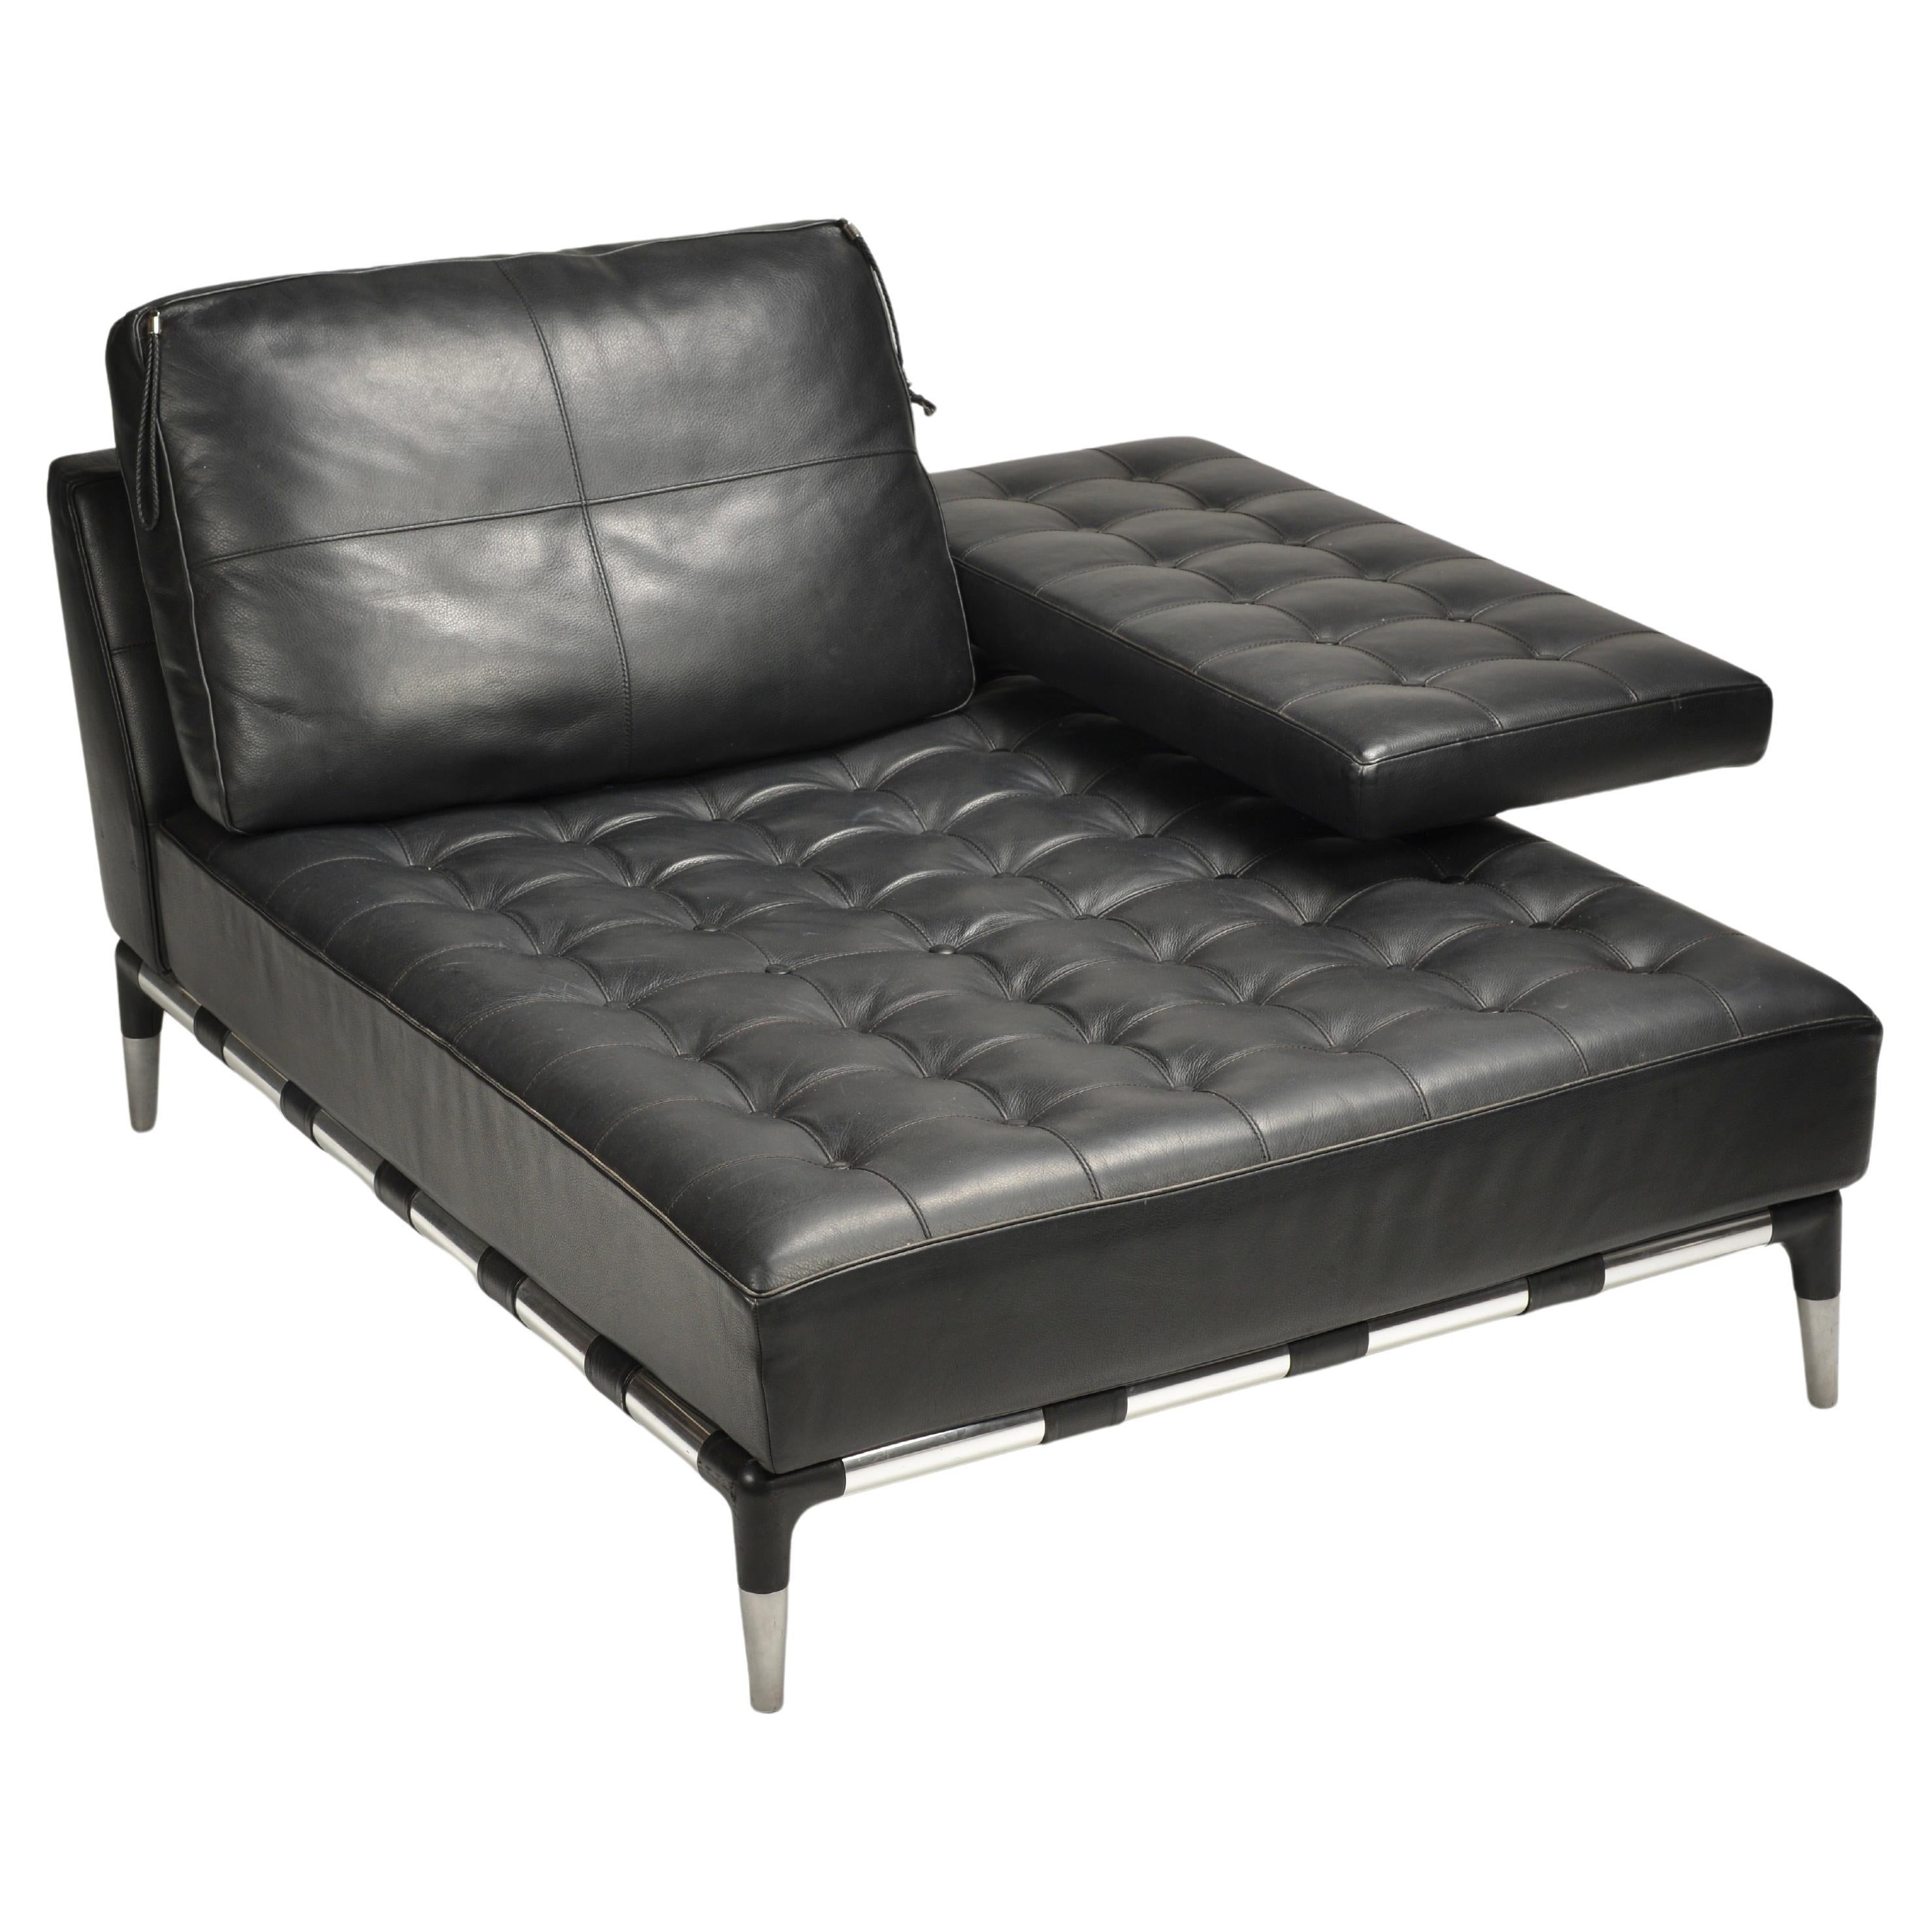 Phillippe Starck Prive Steel And Leather Chaise Longue